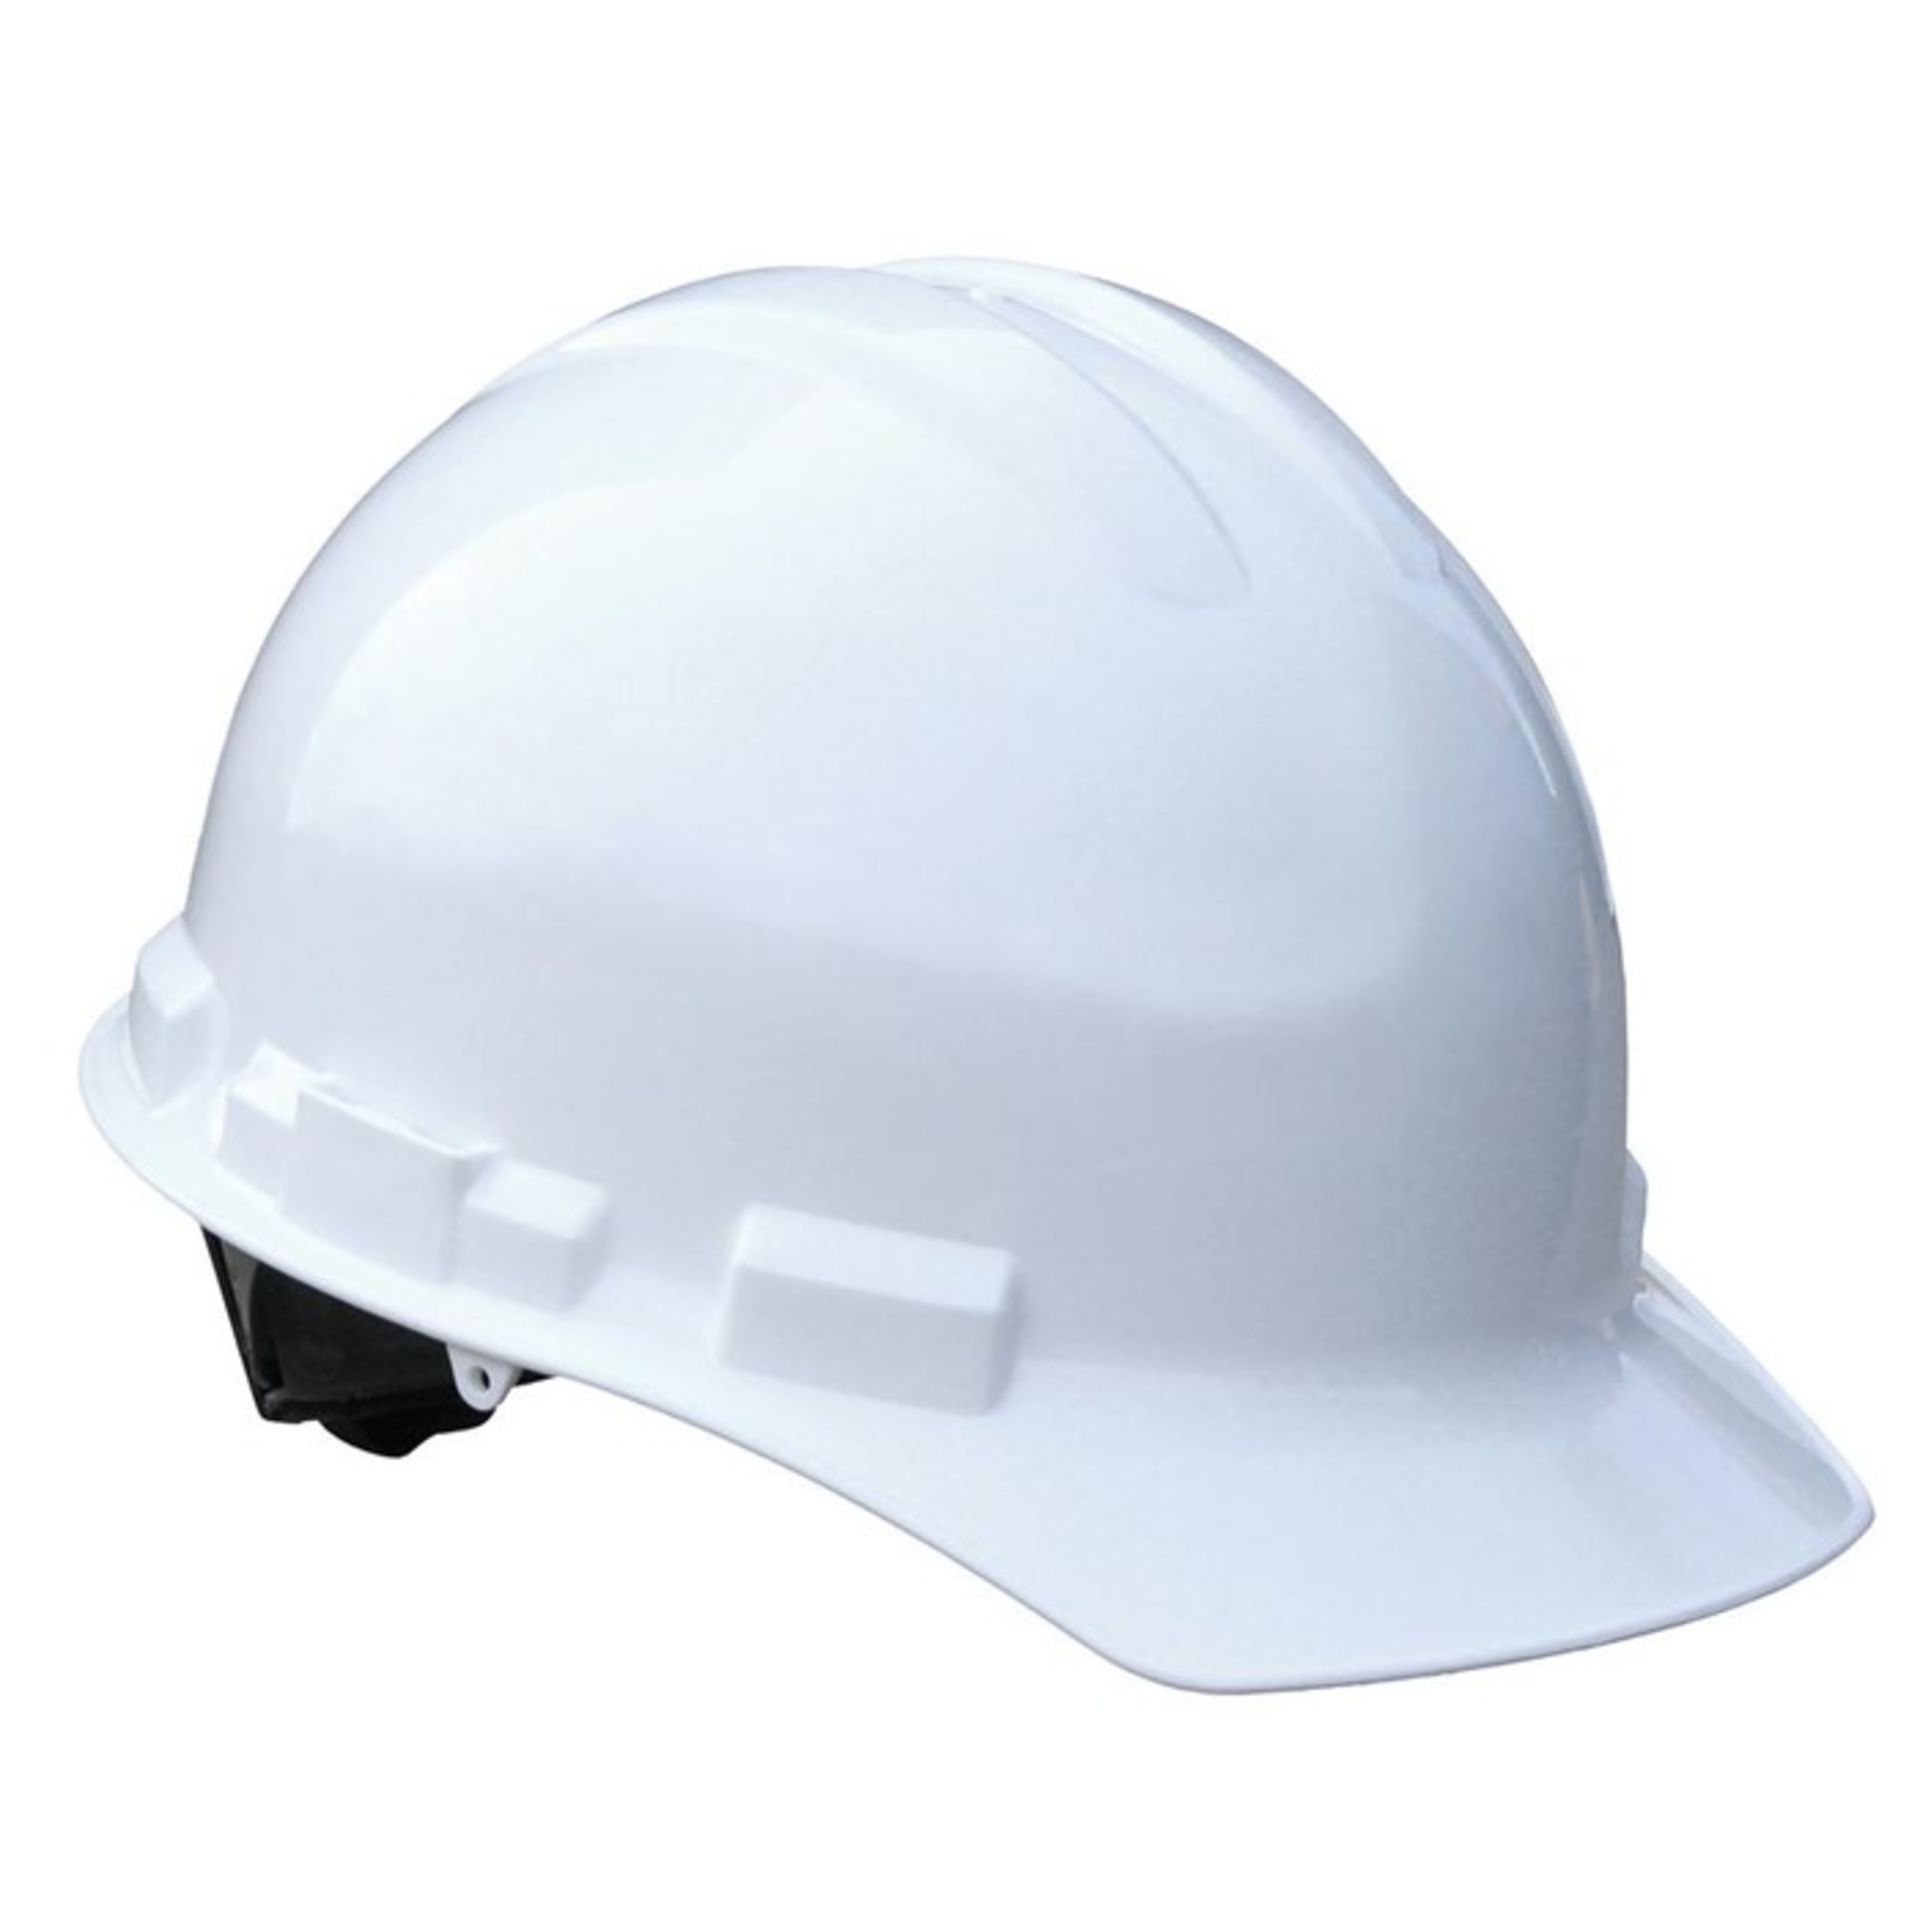 1 AS NEW PACKAGED WHITE HARD HAT (P/N - 104) / RRP £15.00 (VIEWING HIGHLY RECOMMENDED)